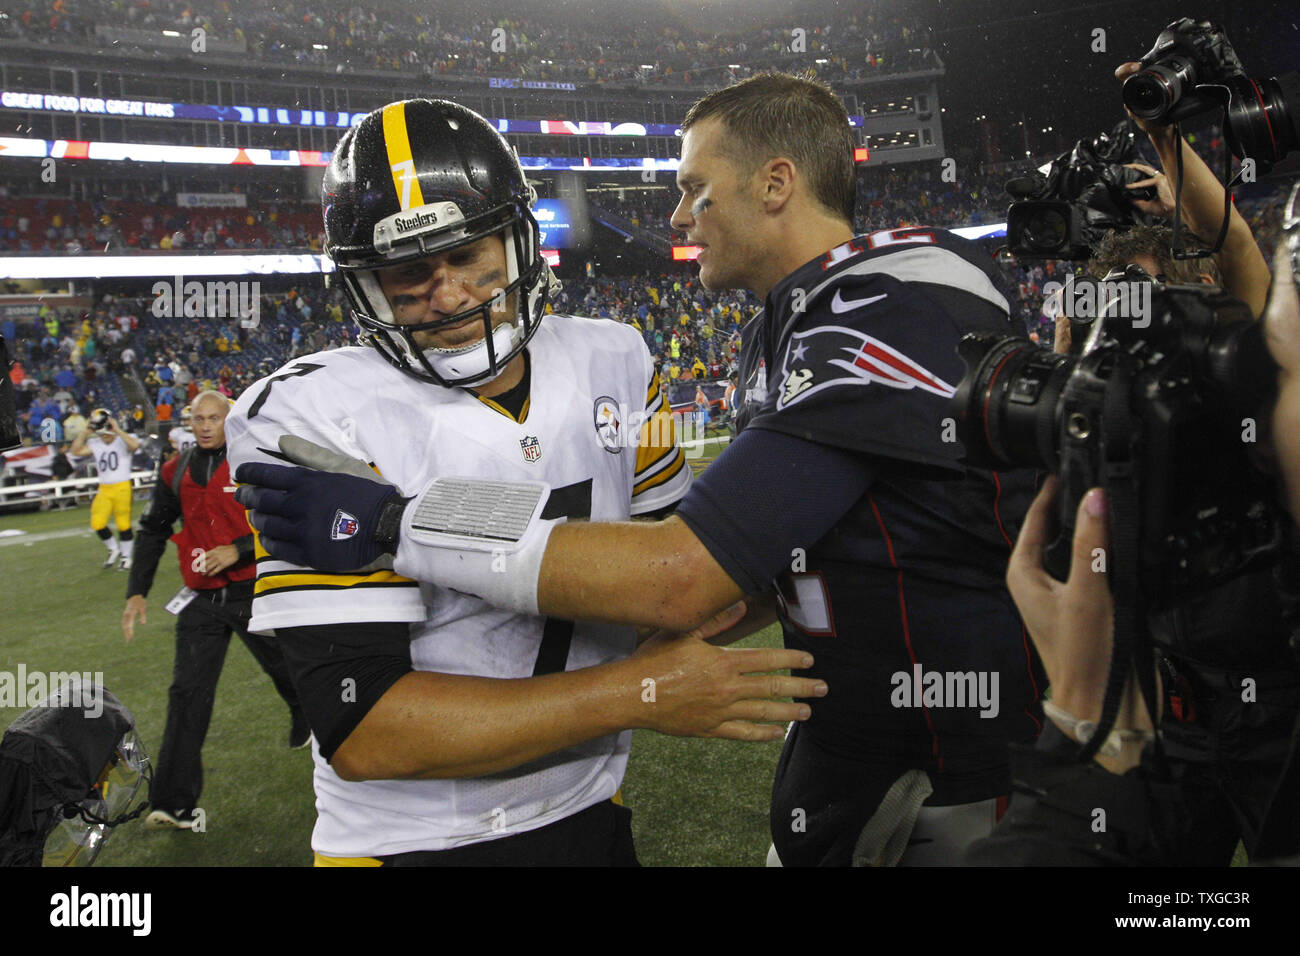 New England Patriots quarterback Tom Brady (12) shakes hands with Pittsburgh Steelers quarterback Ben Roethlisberger (7) after the Patriots defeated the Steelers 28-21 at Gillette Stadium in Foxborough, Massachusetts on September 10, 2015.     Photo by Matthew Healey/ UPI Stock Photo